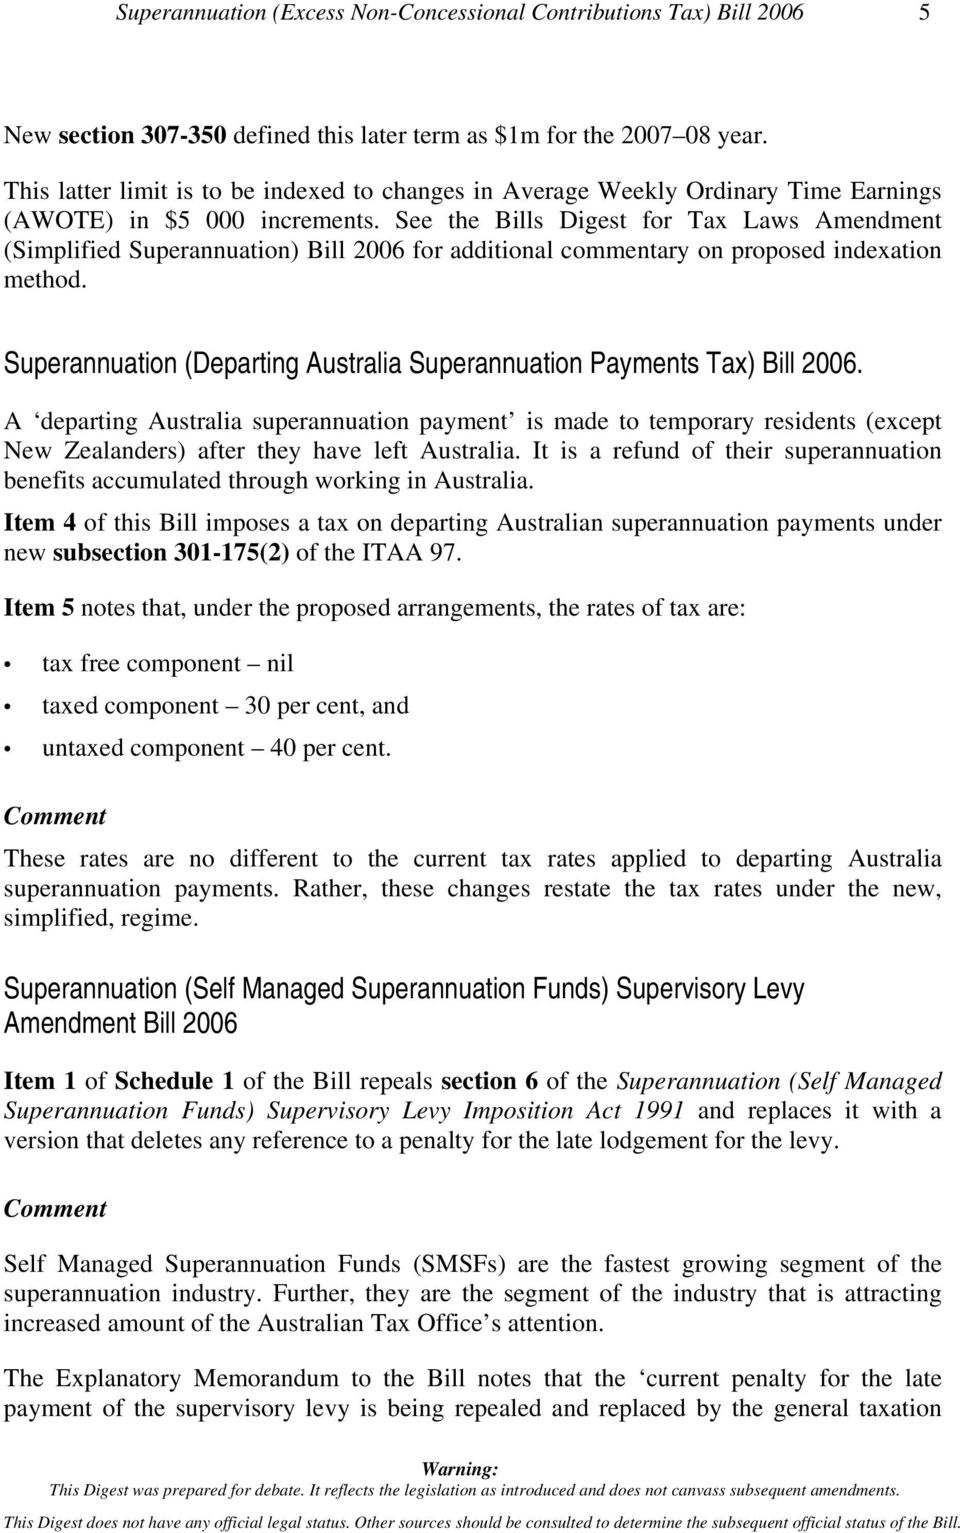 See the Bills Digest for Tax Laws Amendment (Simplified Superannuation) Bill 2006 for additional commentary on proposed indexation method.